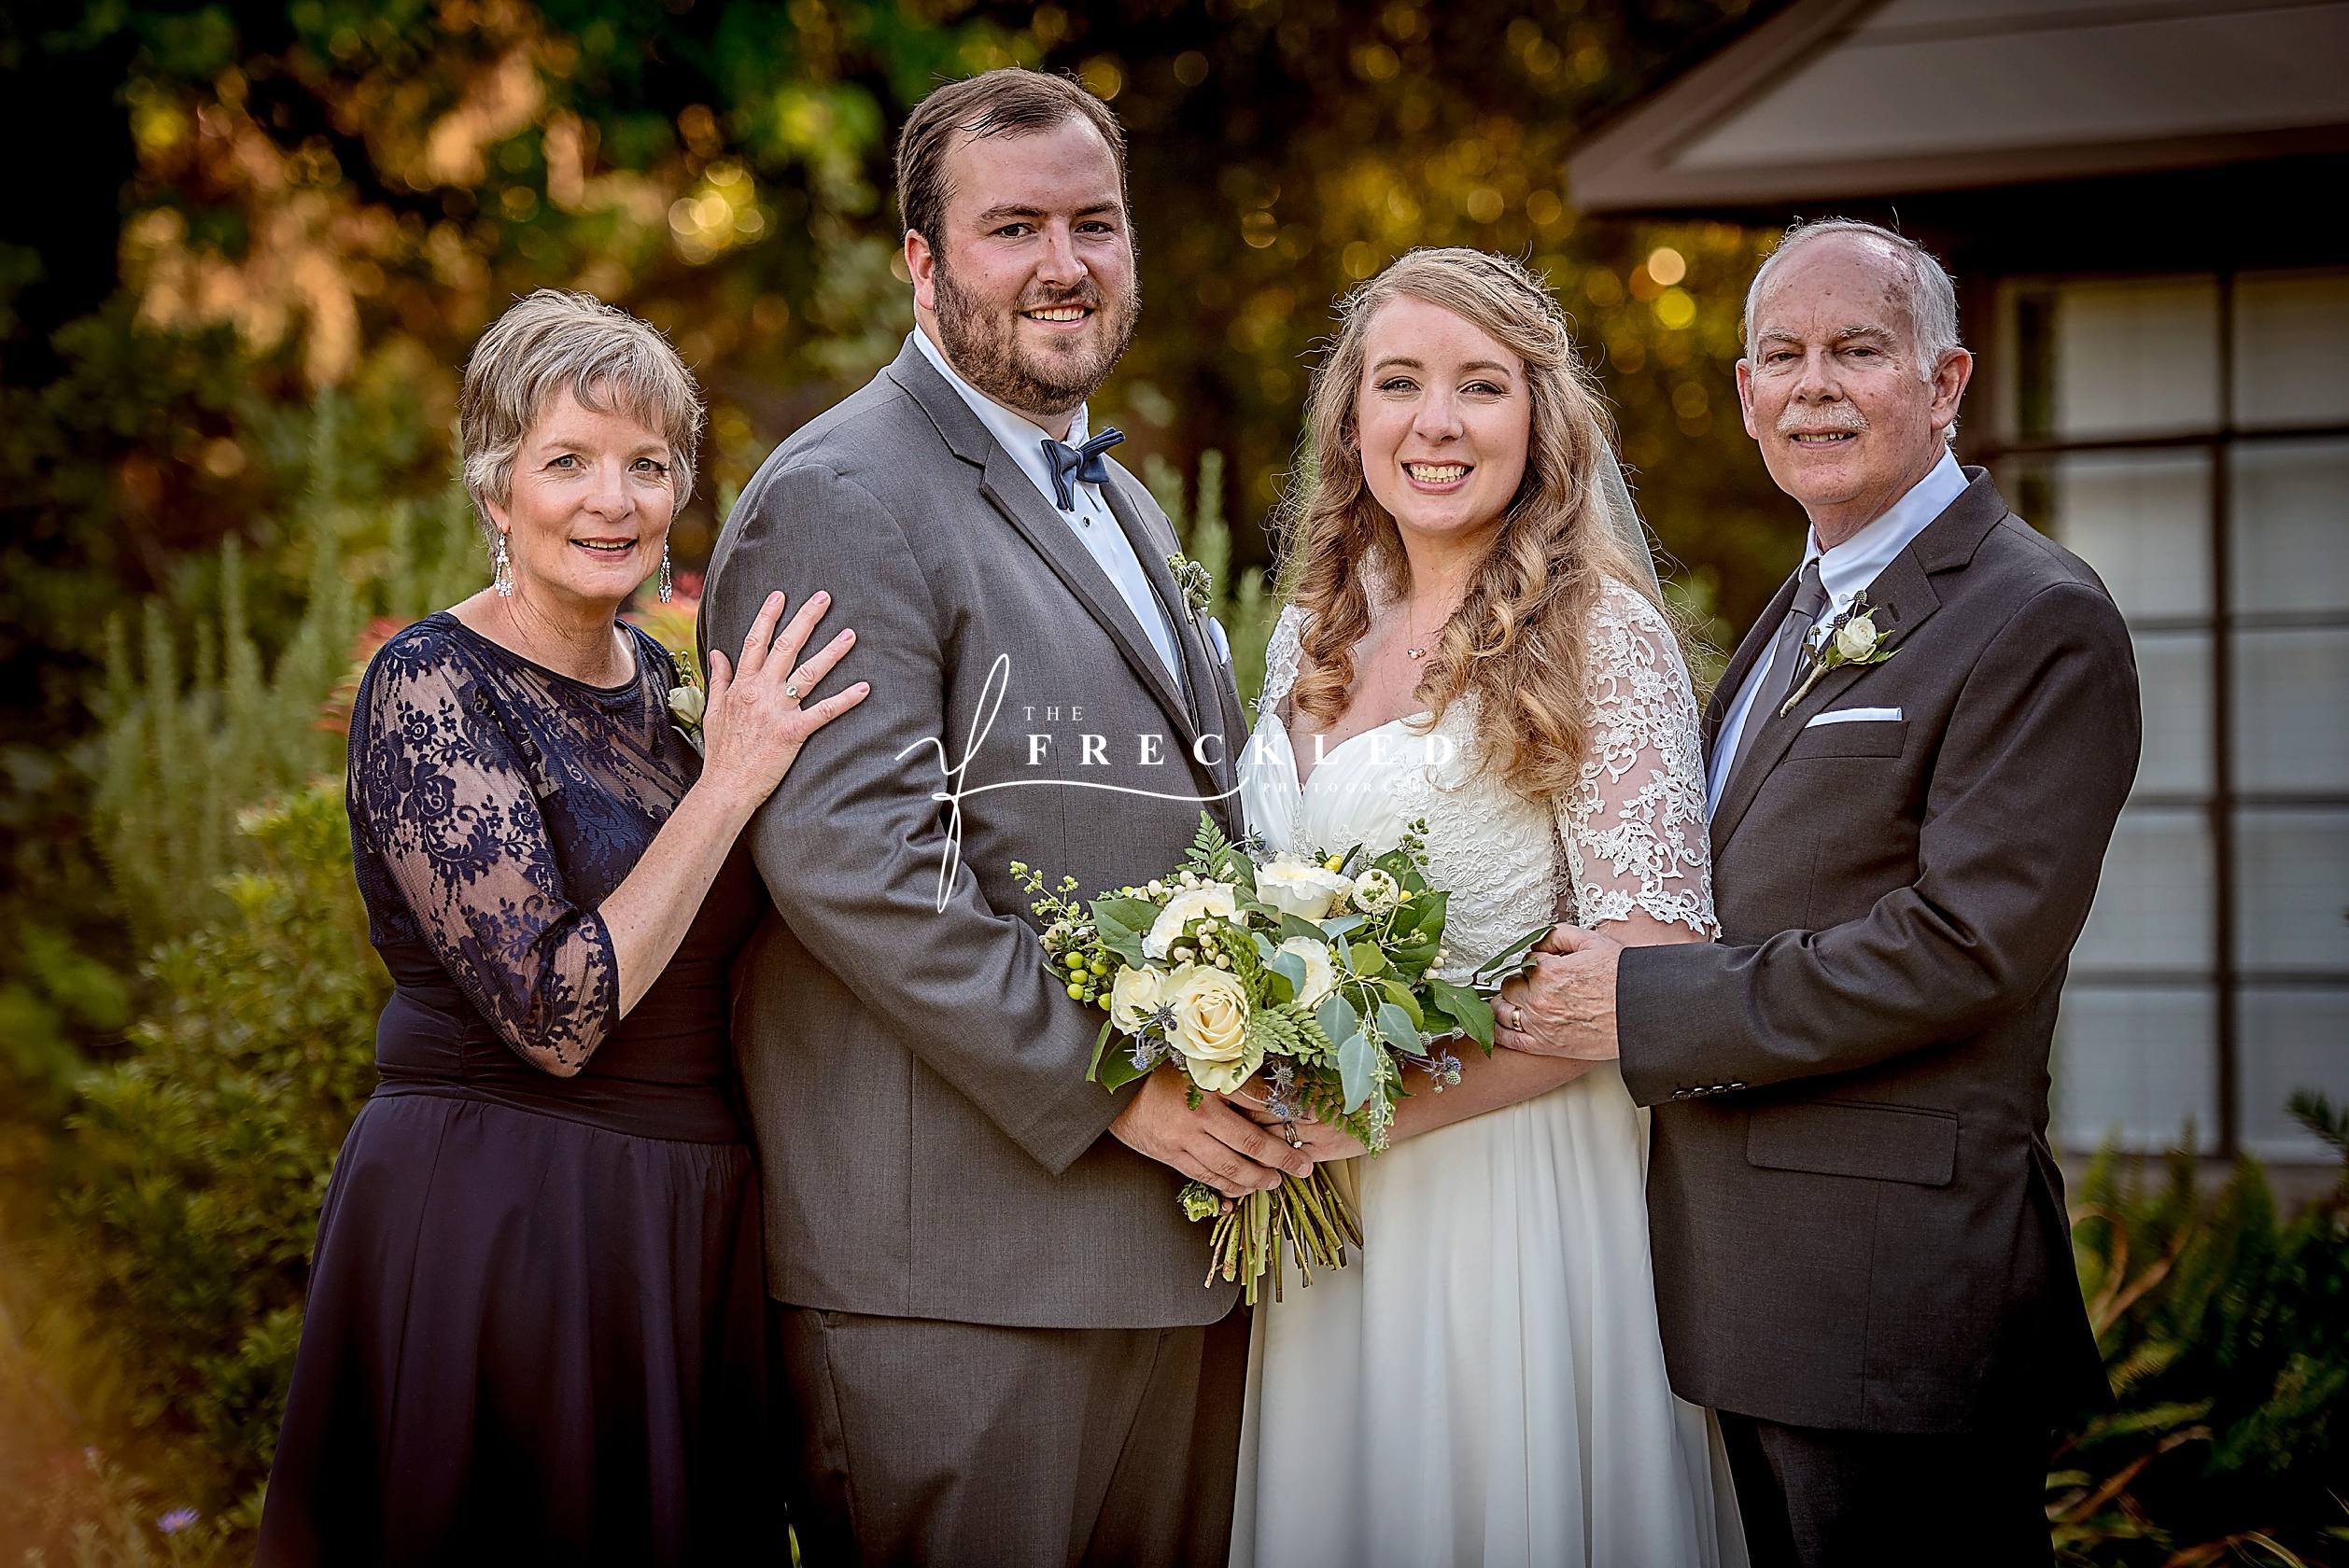 Wedding Family Portraits | Keeping It Simple - The Freckled Photographer